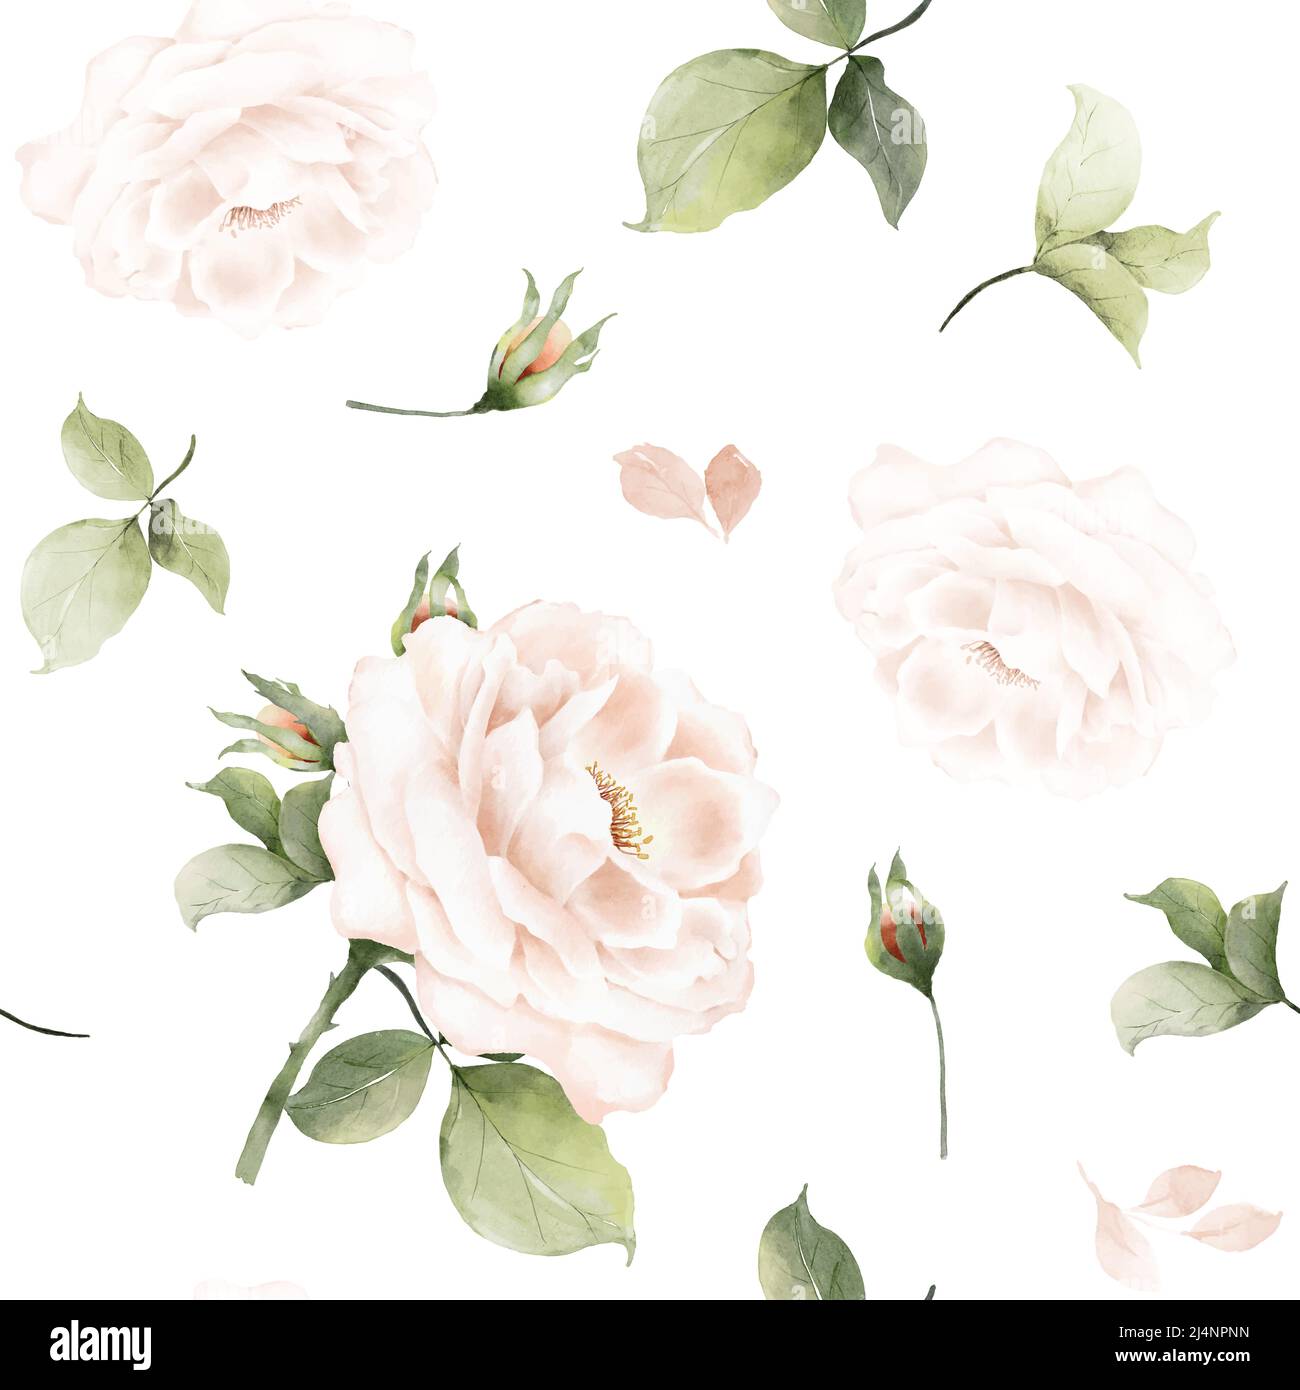 Seamless pattern with hand-painted watercolor bouquets of pink roses and leaves. Botanical pattern vector suitable for decorating wedding backgrounds, Stock Vector